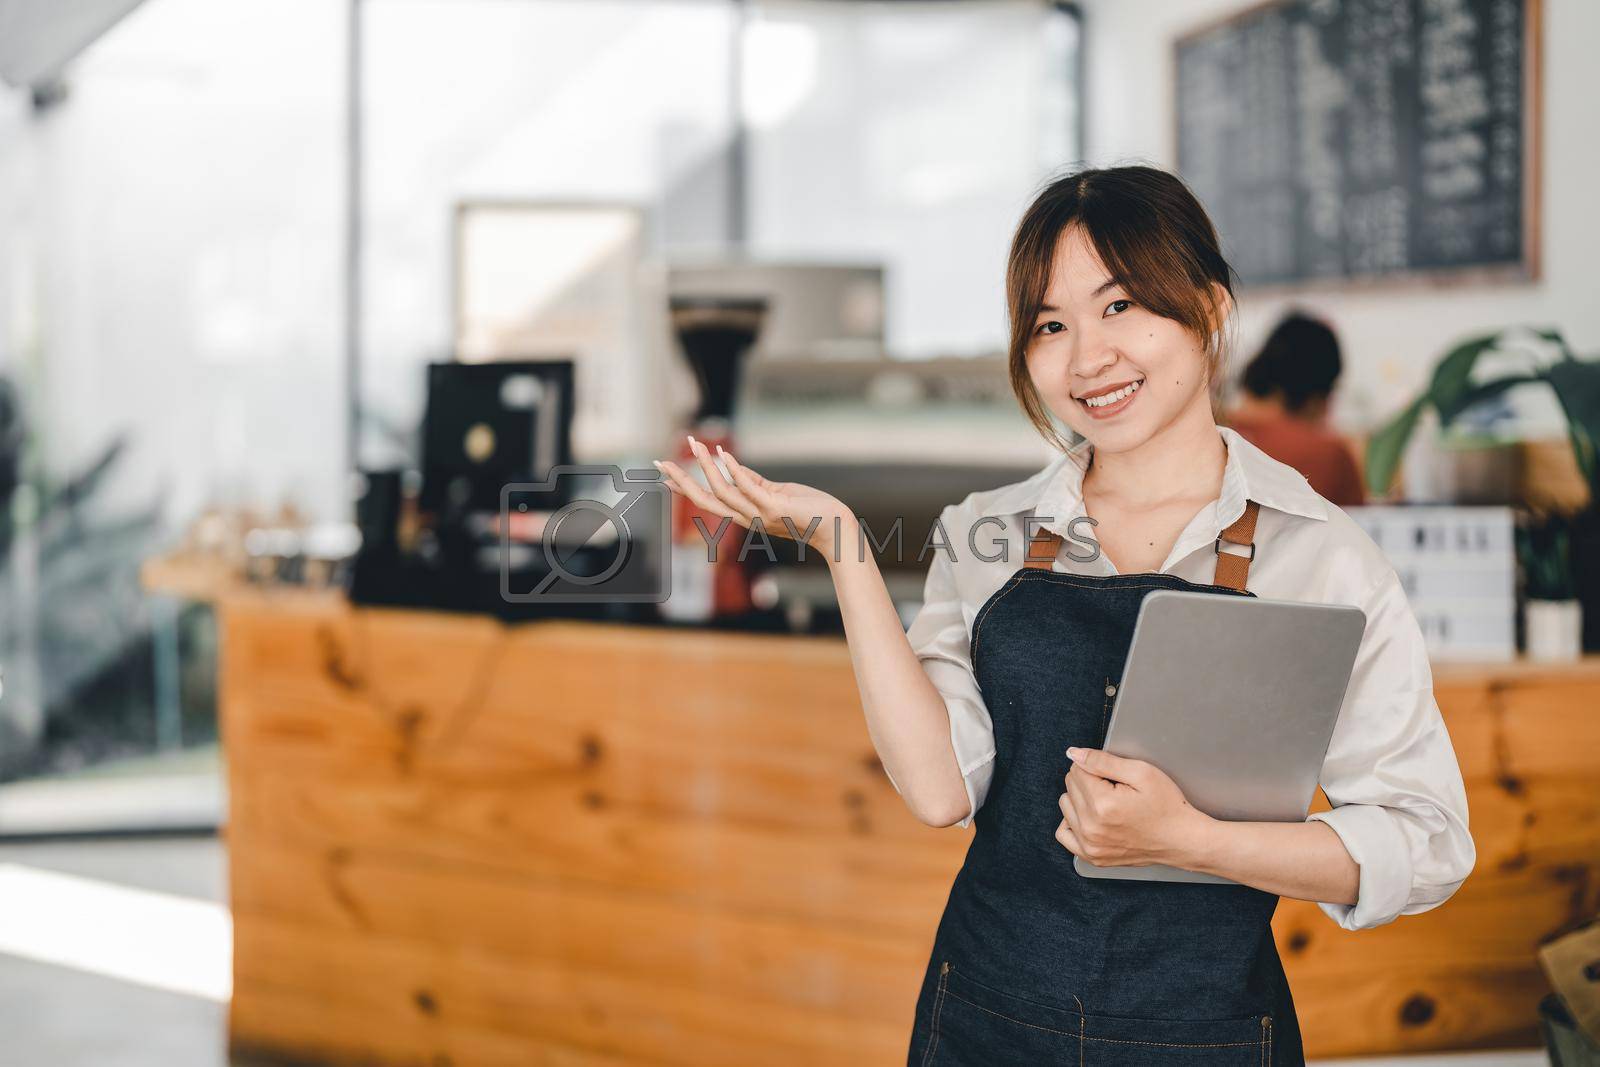 Royalty free image of Asian woman barista holding digital tablet for checking order from customer at coffee cafe shop background , SME business concept by nateemee